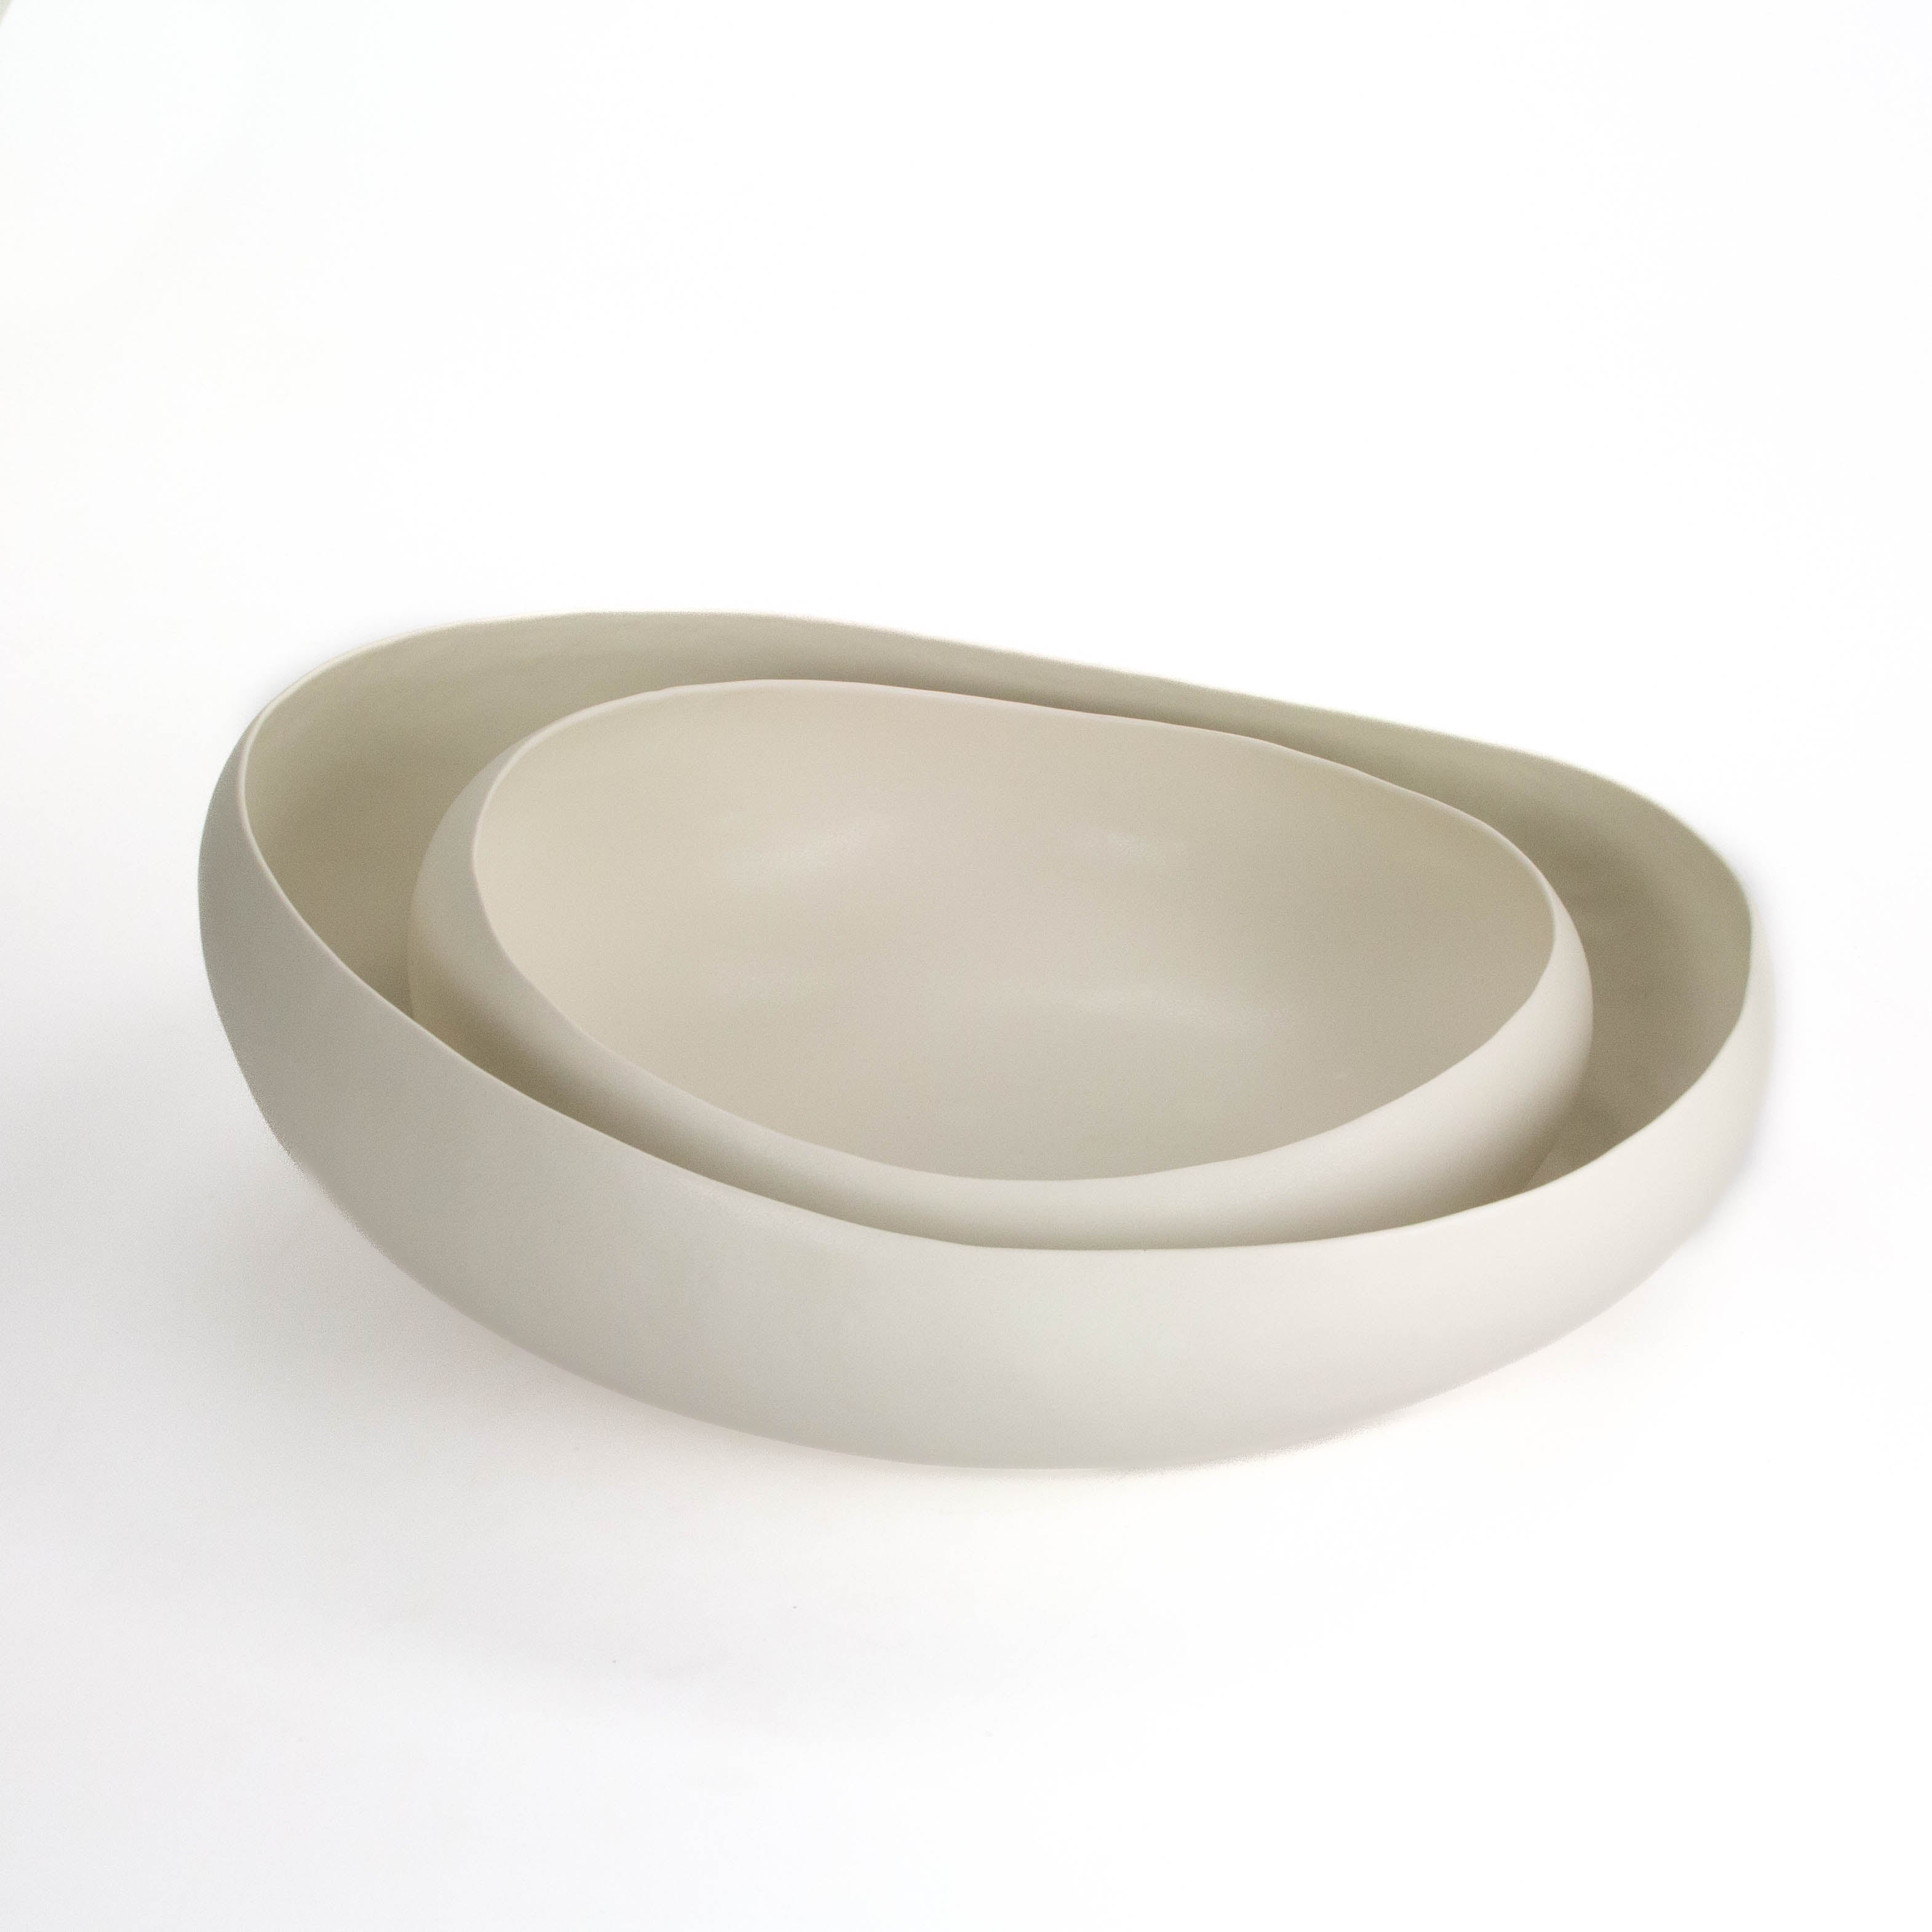 Oval Stacked Bowls